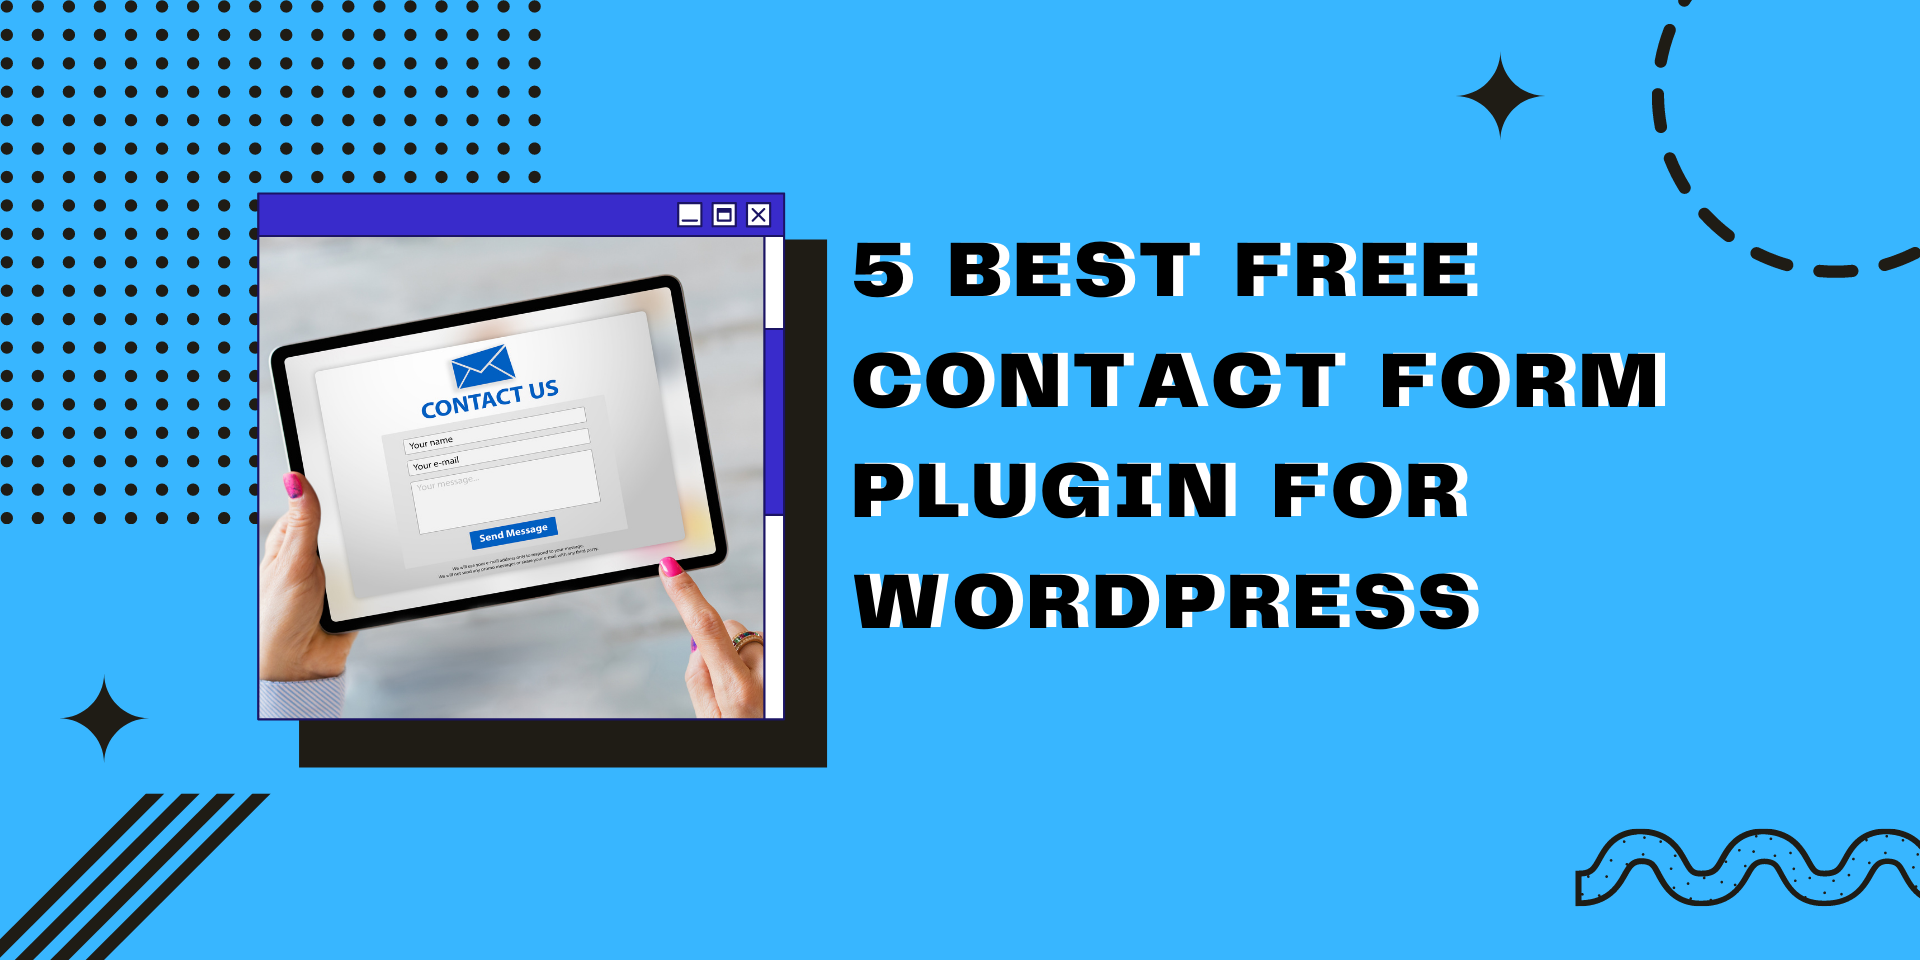 5 Best Free Contact Form Plugin For WordPress